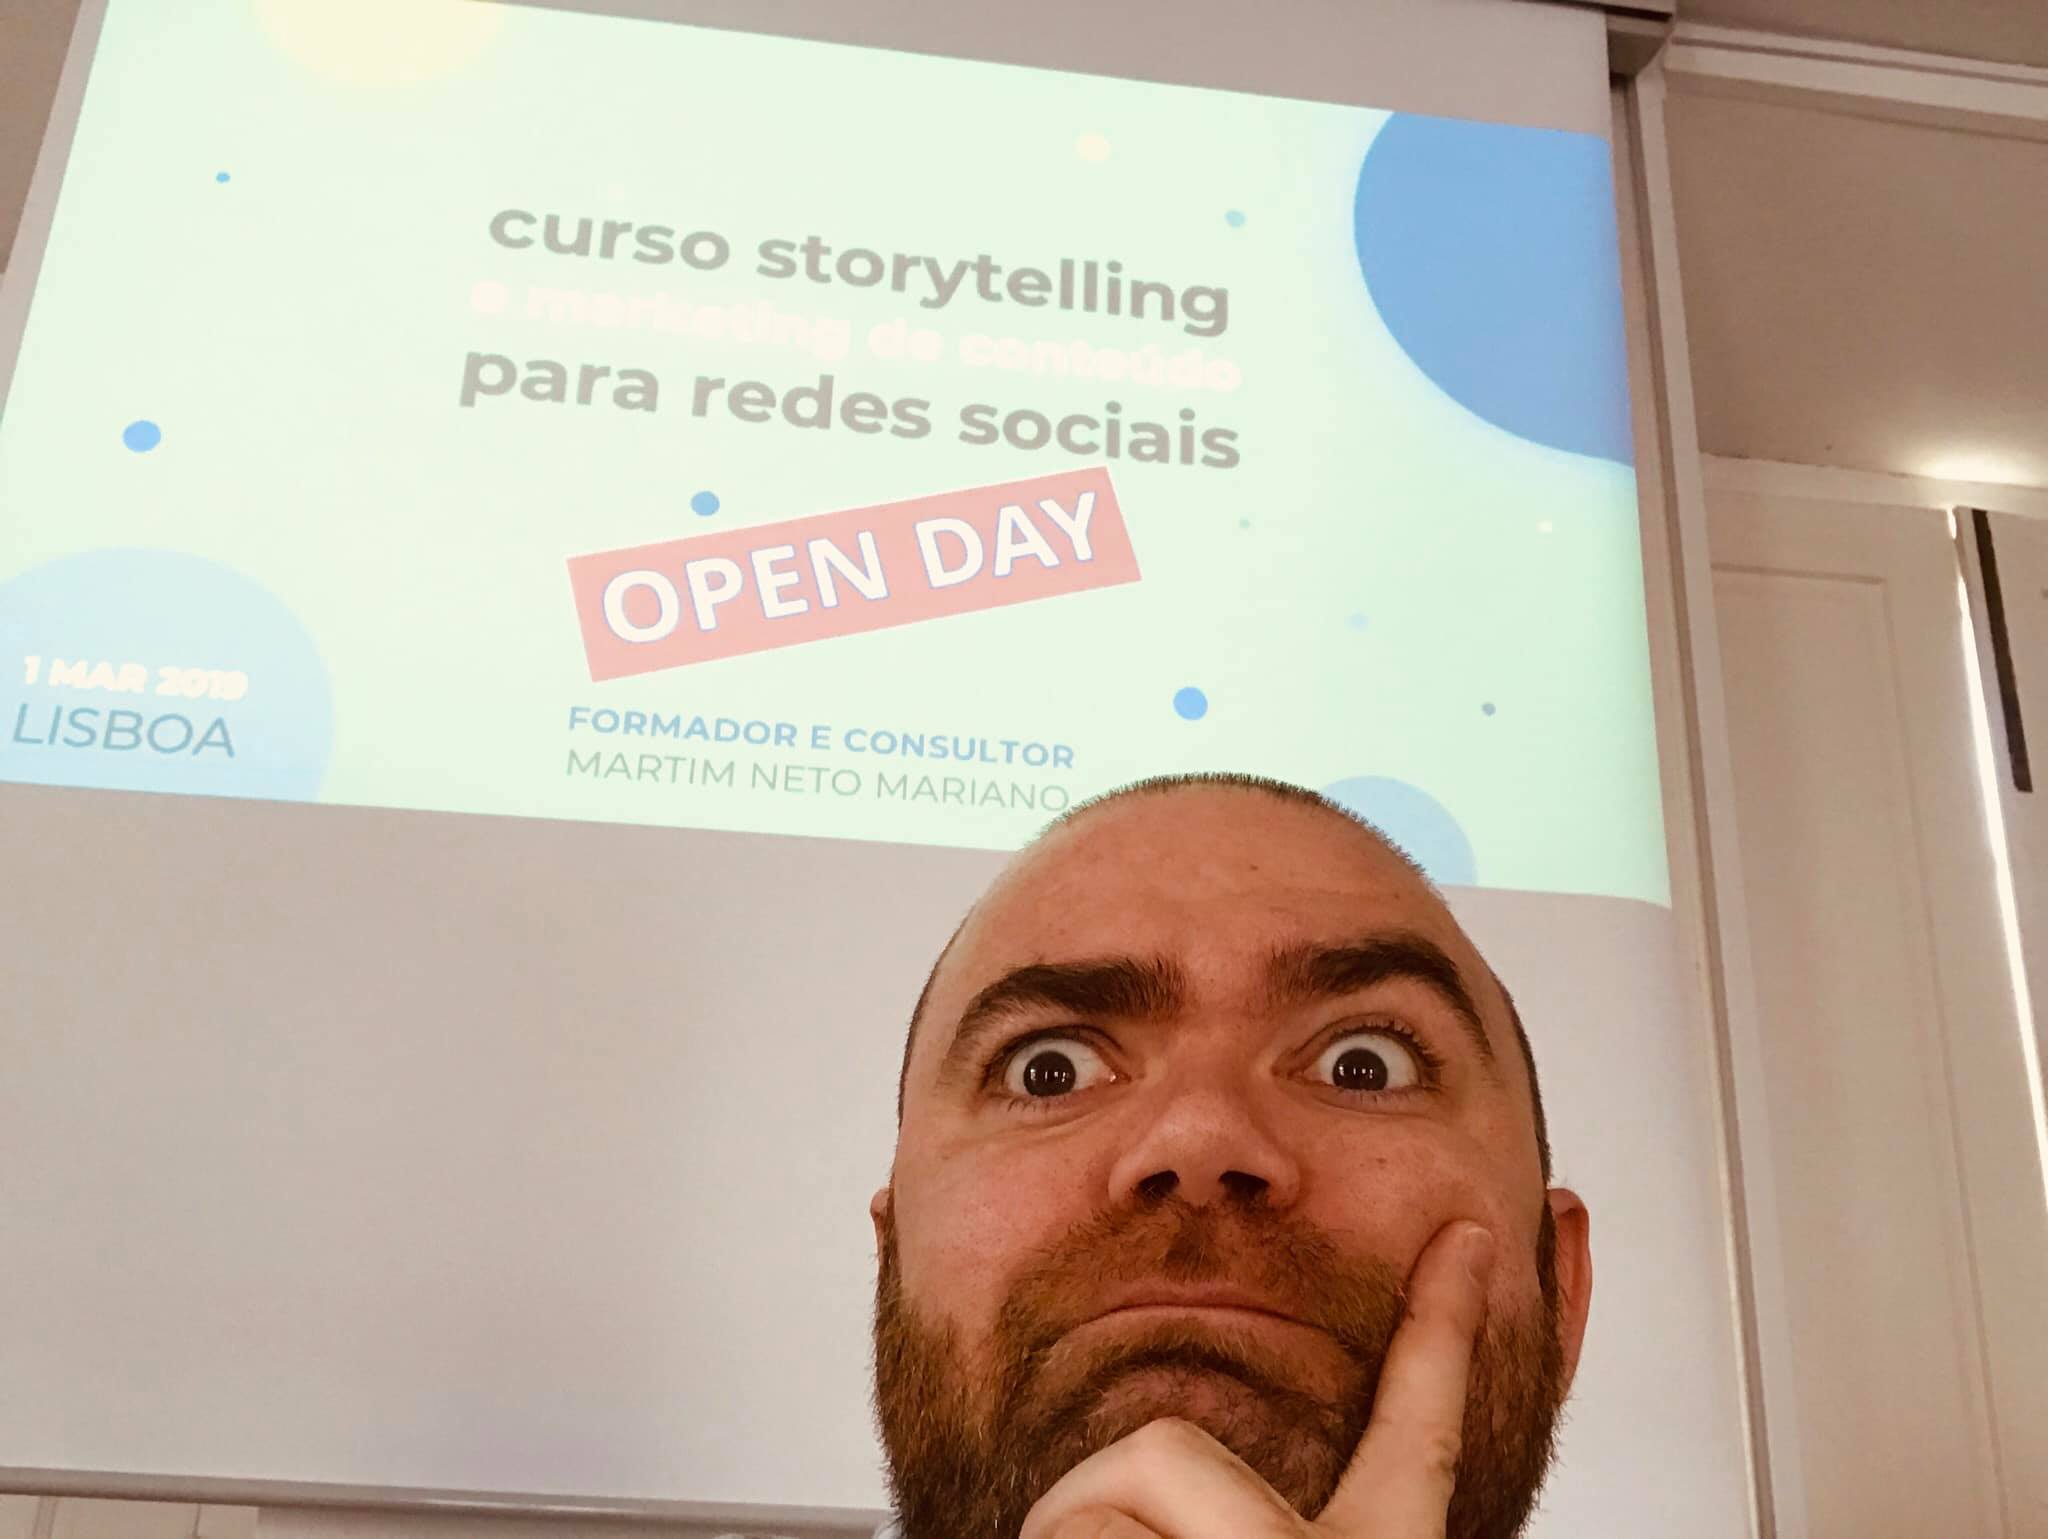 Martim Mariano - Copywriter and Communication Consultant - Connecting Stories PARTTEAM & OEMKIOSKS